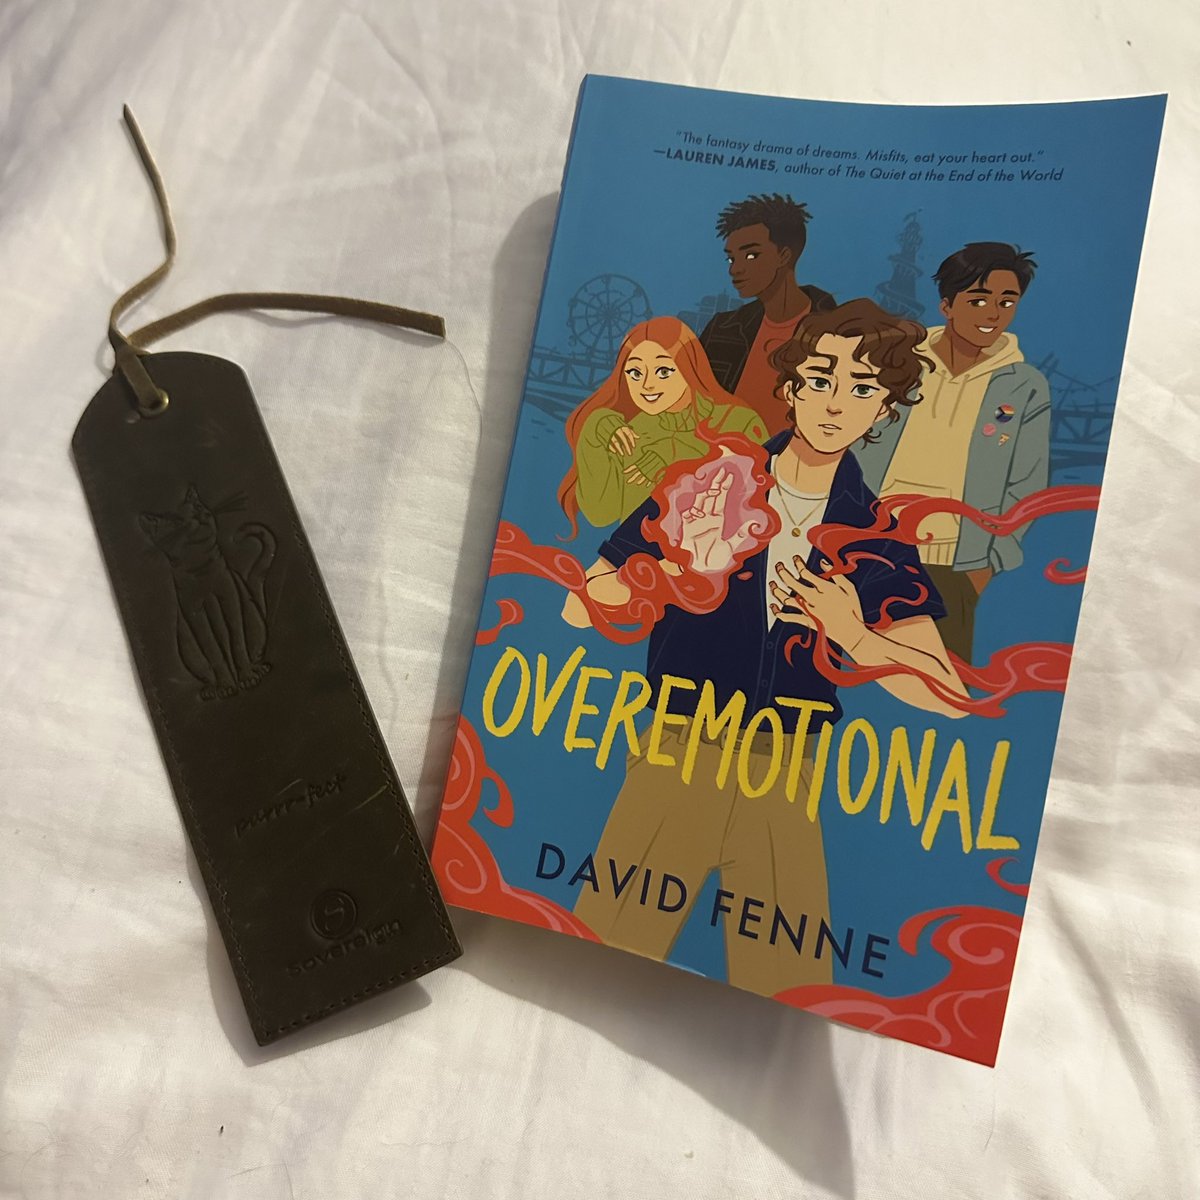 I have literally just finished this book and I don’t think I’m not going to be talking about it for a while!

I loved it. It’s brilliant. All you need to know is that you need to read it!

@David_Fenne #OverEmotional #BookOfTheYear #ReadingTwitter #BookTwitter #BookRecommendation